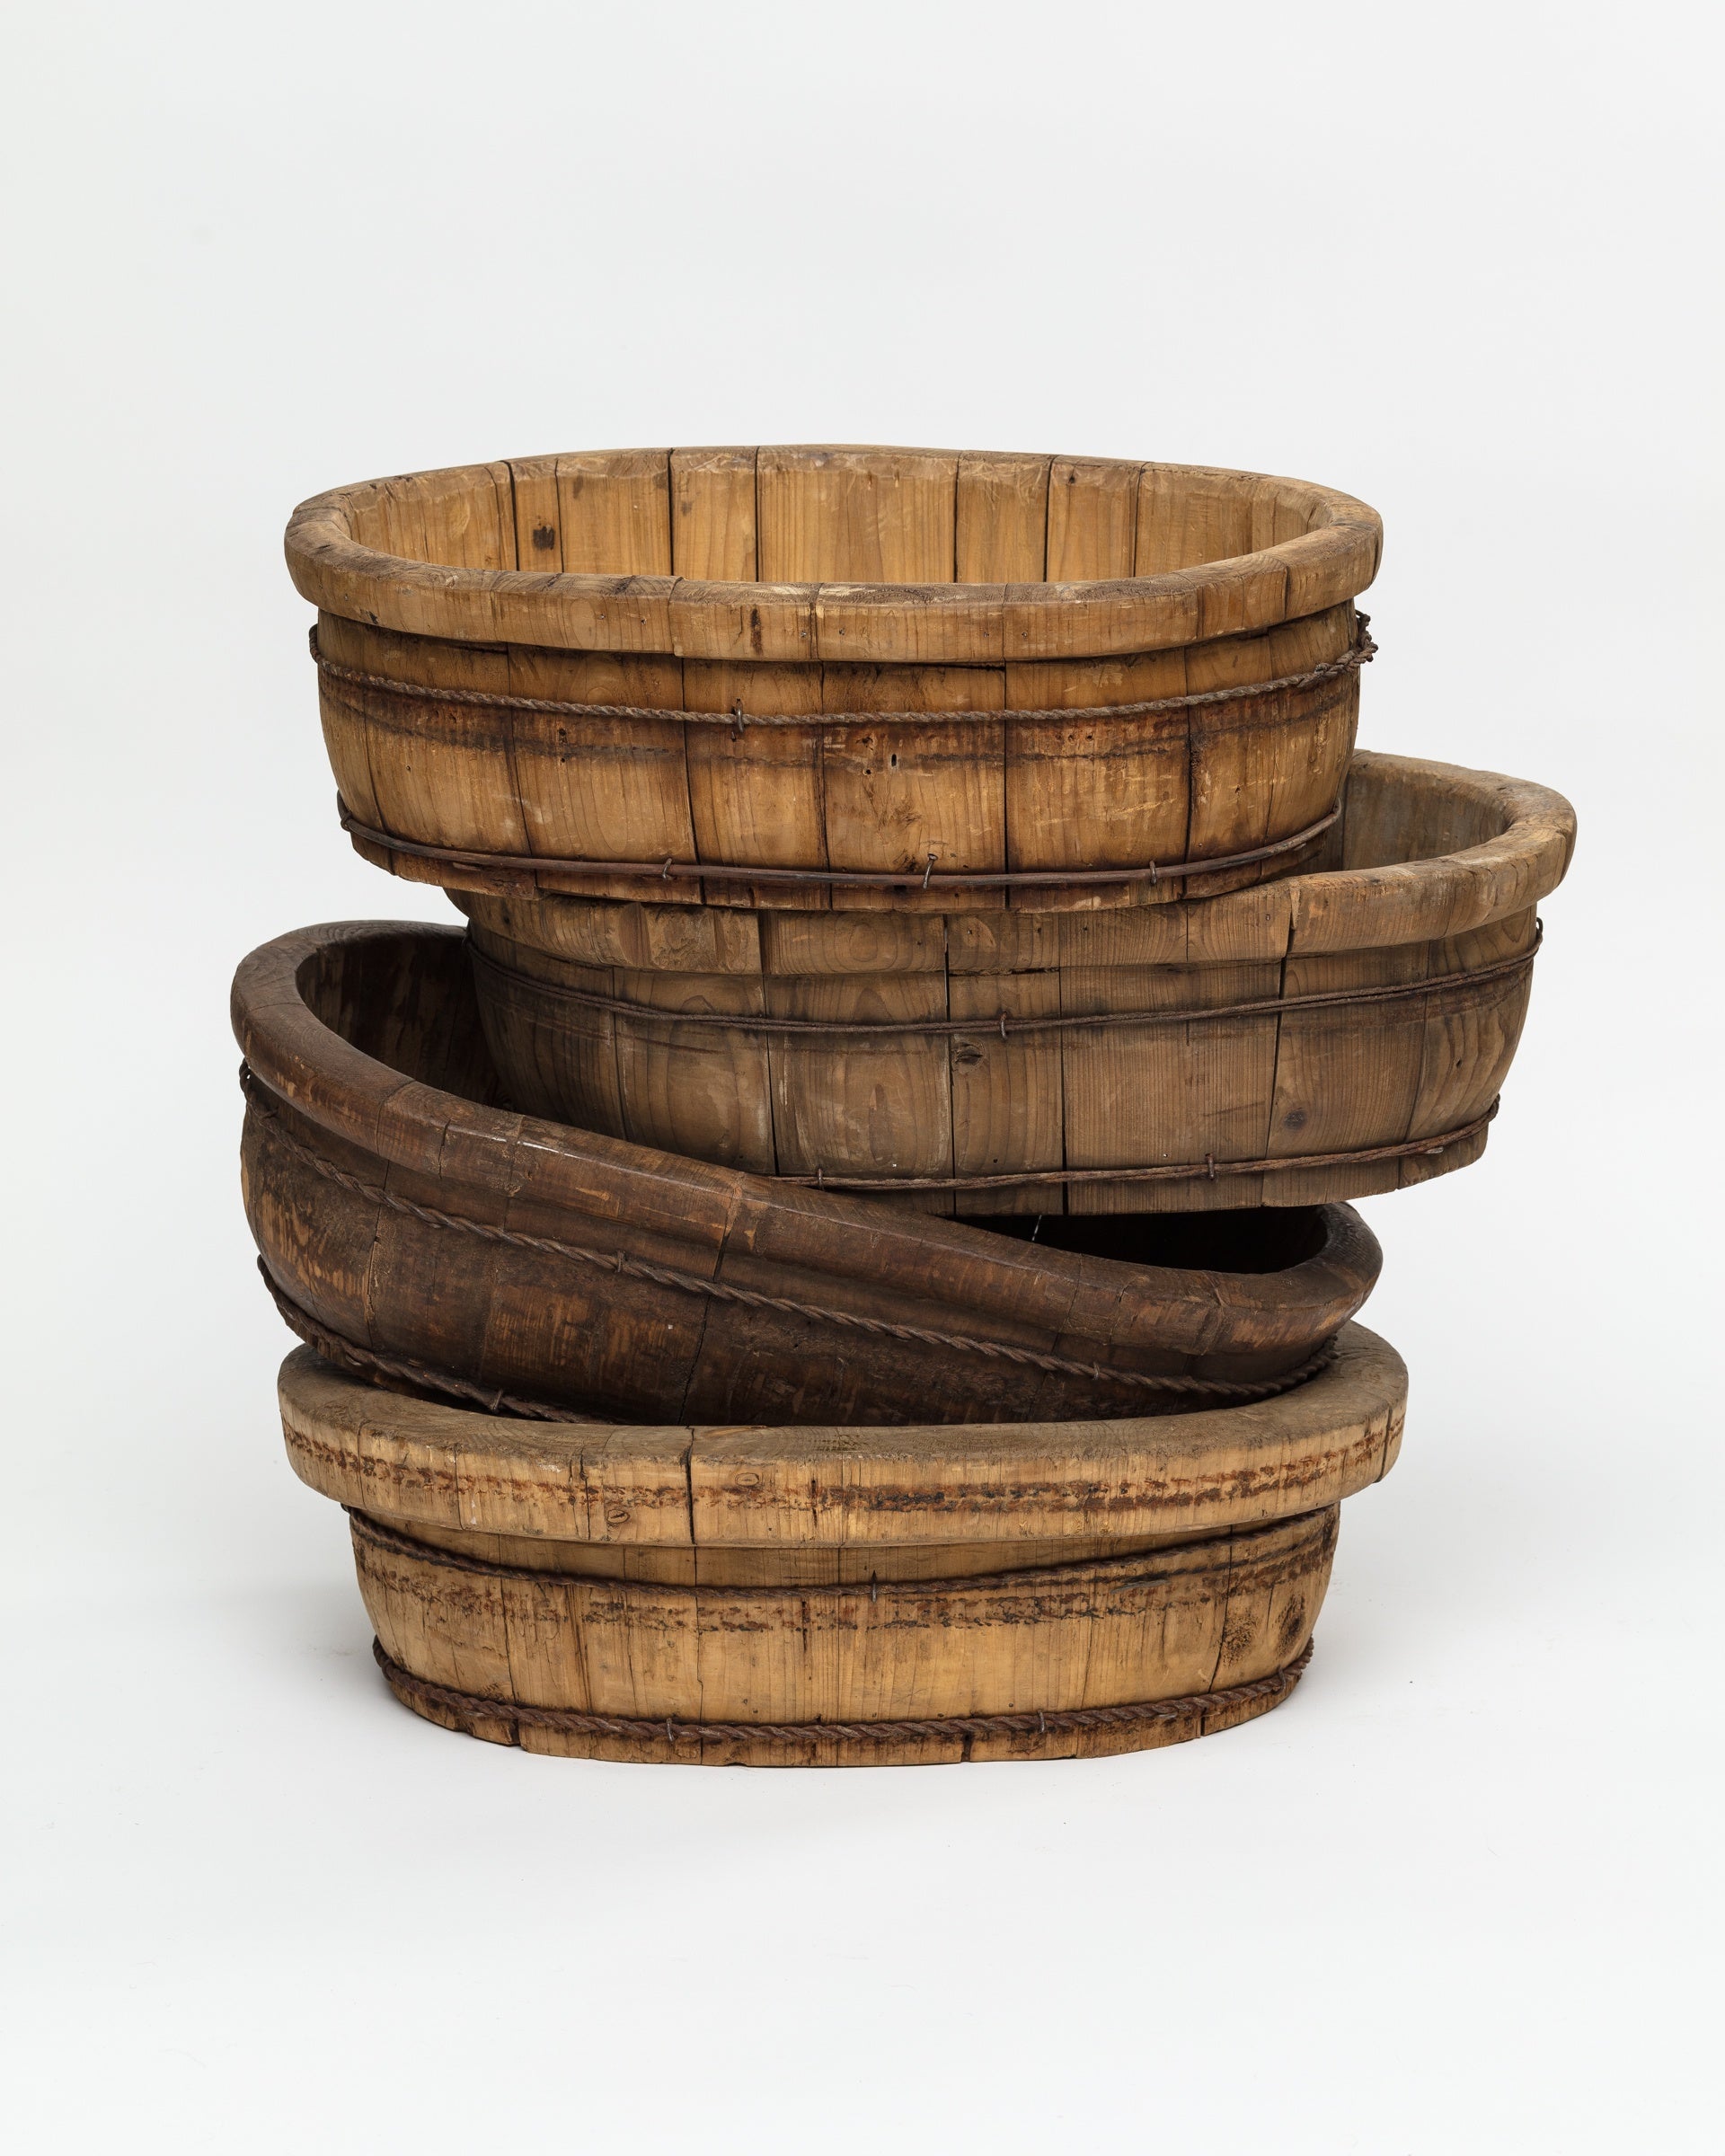 A stack of four rustic, round wooden baskets of varying sizes exudes rustic elegance. The handmade vintage baskets are slightly worn, displaying visible wood grain and metal bands that highlight their aged charm. They nest inside one another, creating a tiered arrangement against a plain white background. These are the Indus Design Imports Oval Wood Bucket 10.
